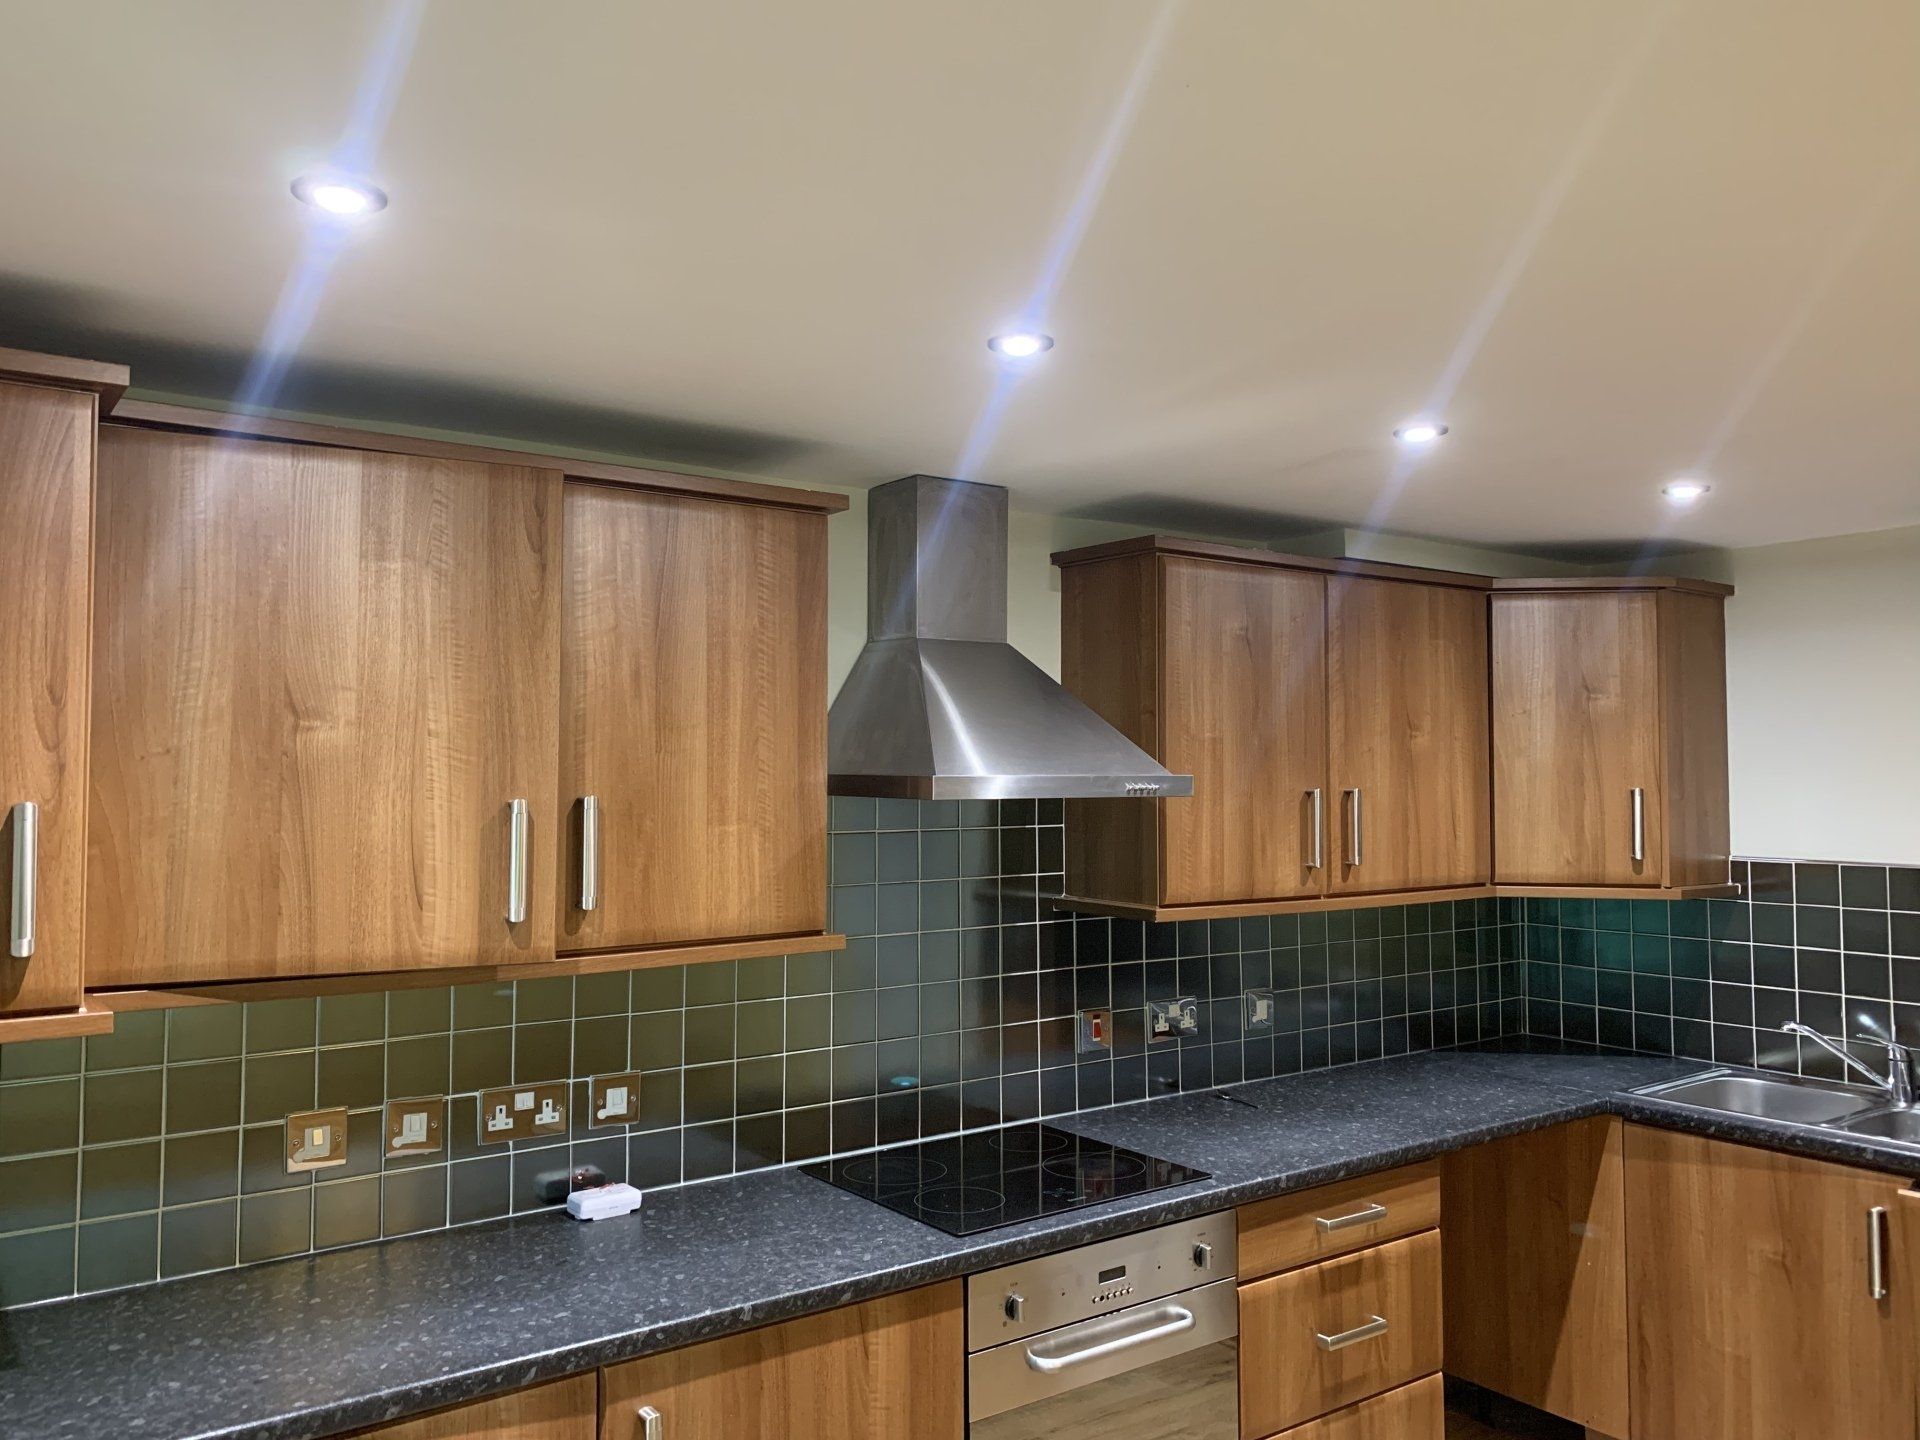 Kitchen  spot lights  lights by Electrician4you in newton le willows